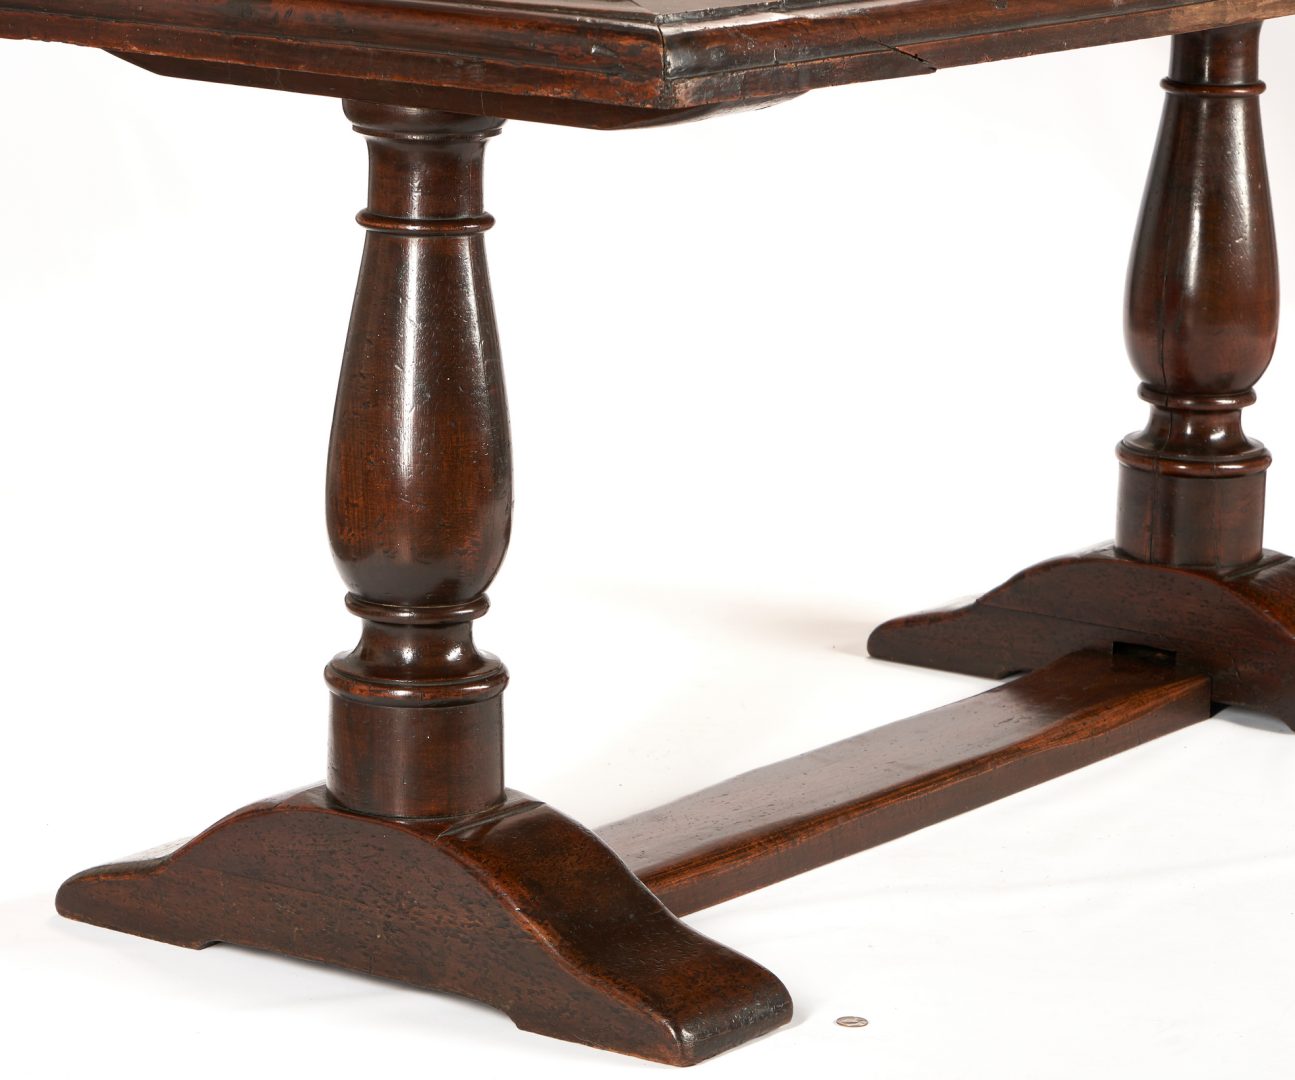 Lot 544: Italian or Continental Baroque Style Refectory Table, Late 19th Century